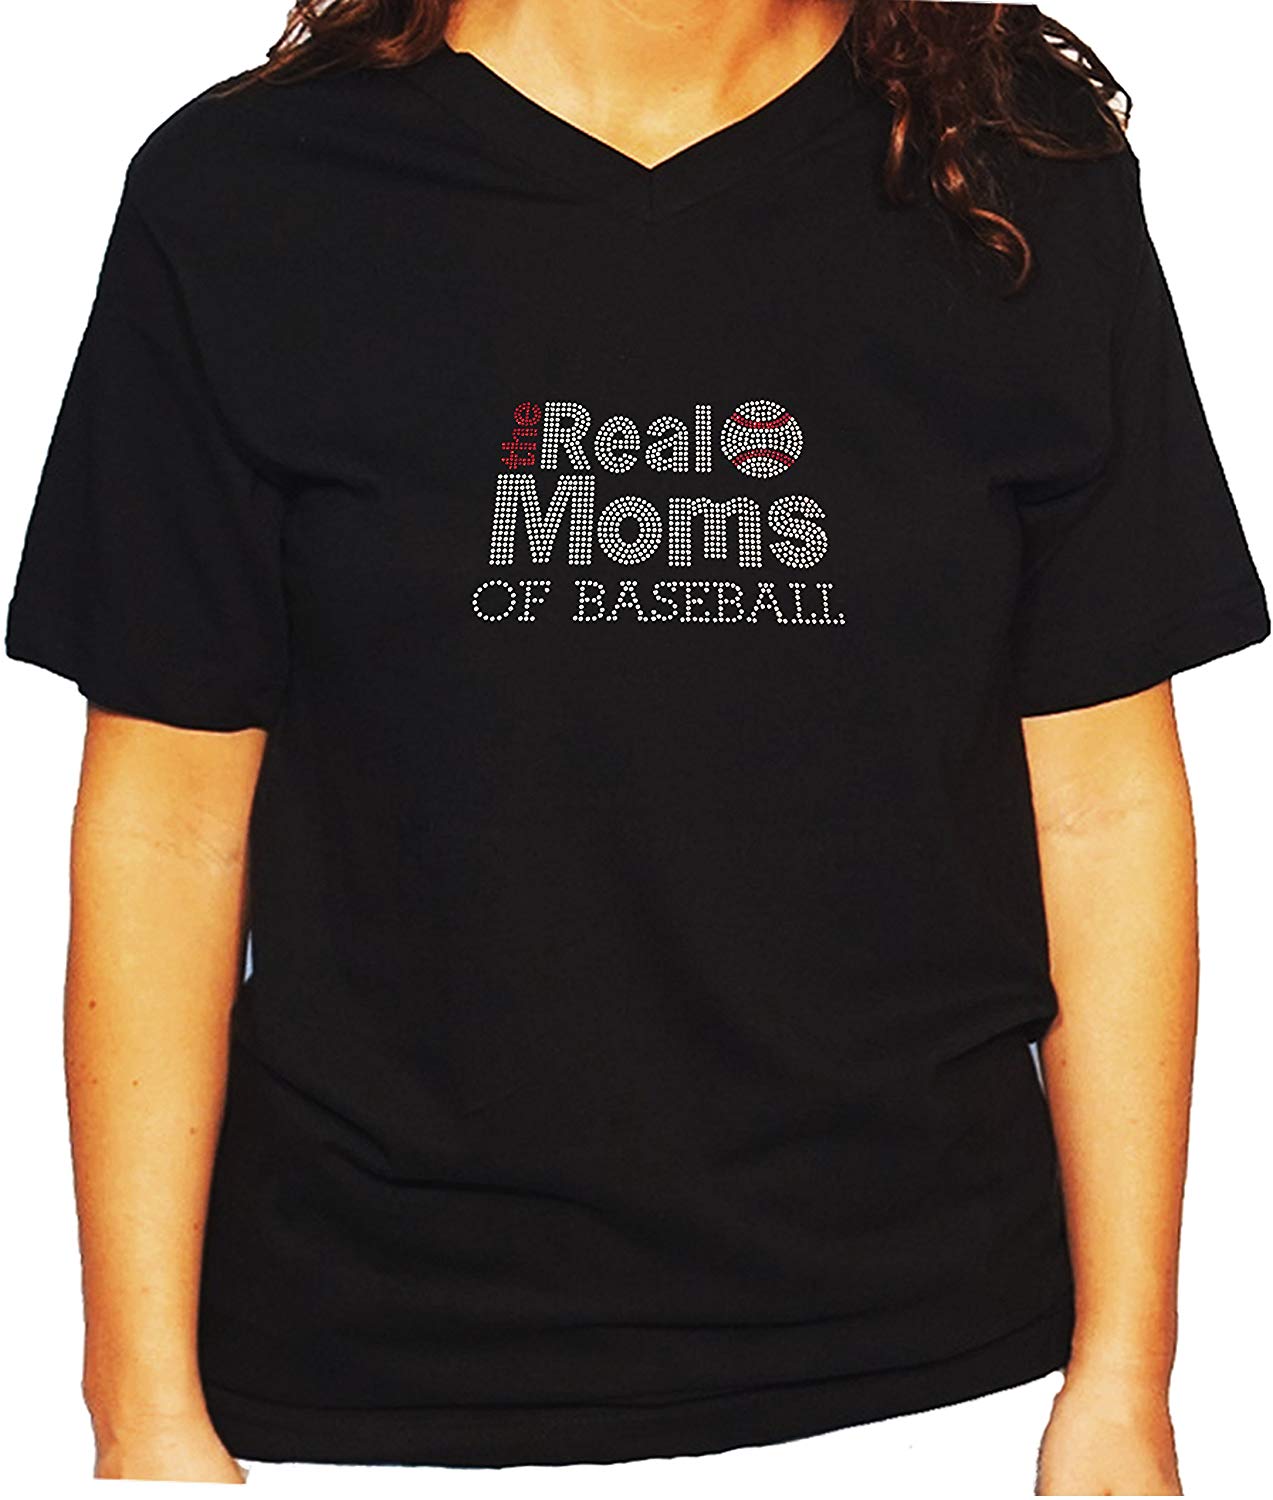 Women's / Unisex T-Shirt with The Real Moms of Baseball in Rhinestones